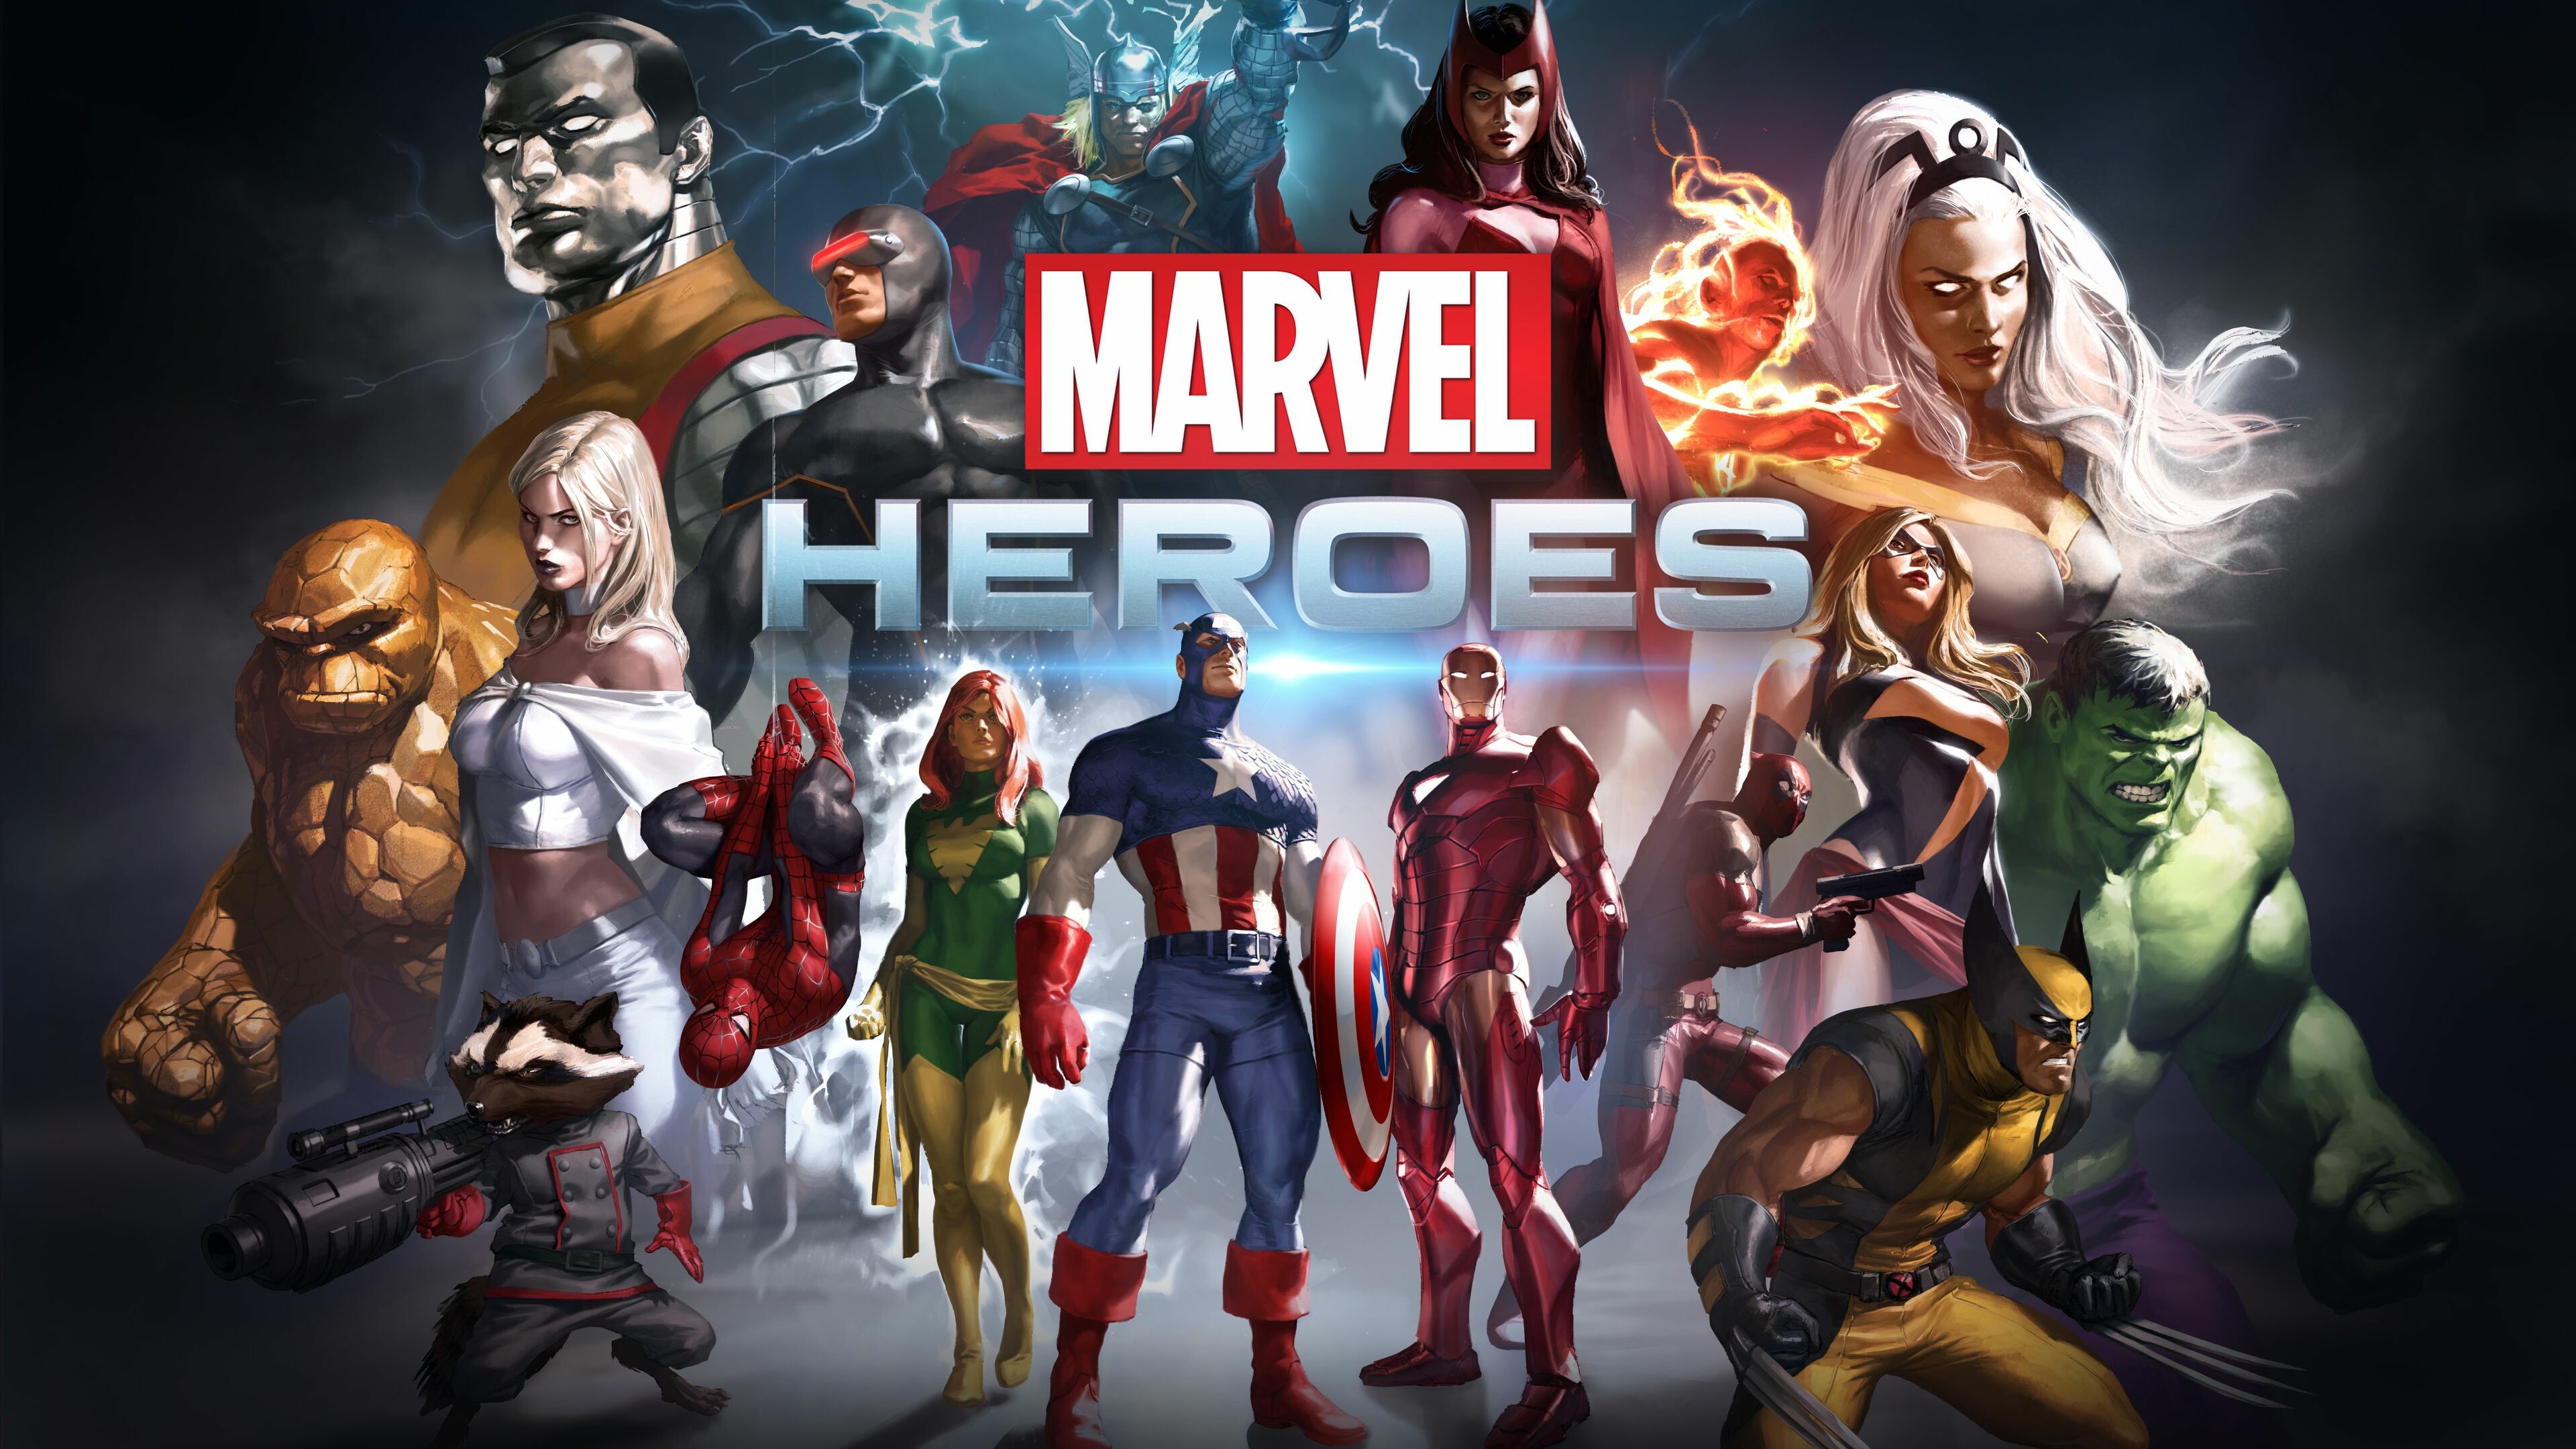 Marvel Heroes: Captain America, Iron Man, Fictional characters. 3840x2160 4K Background.